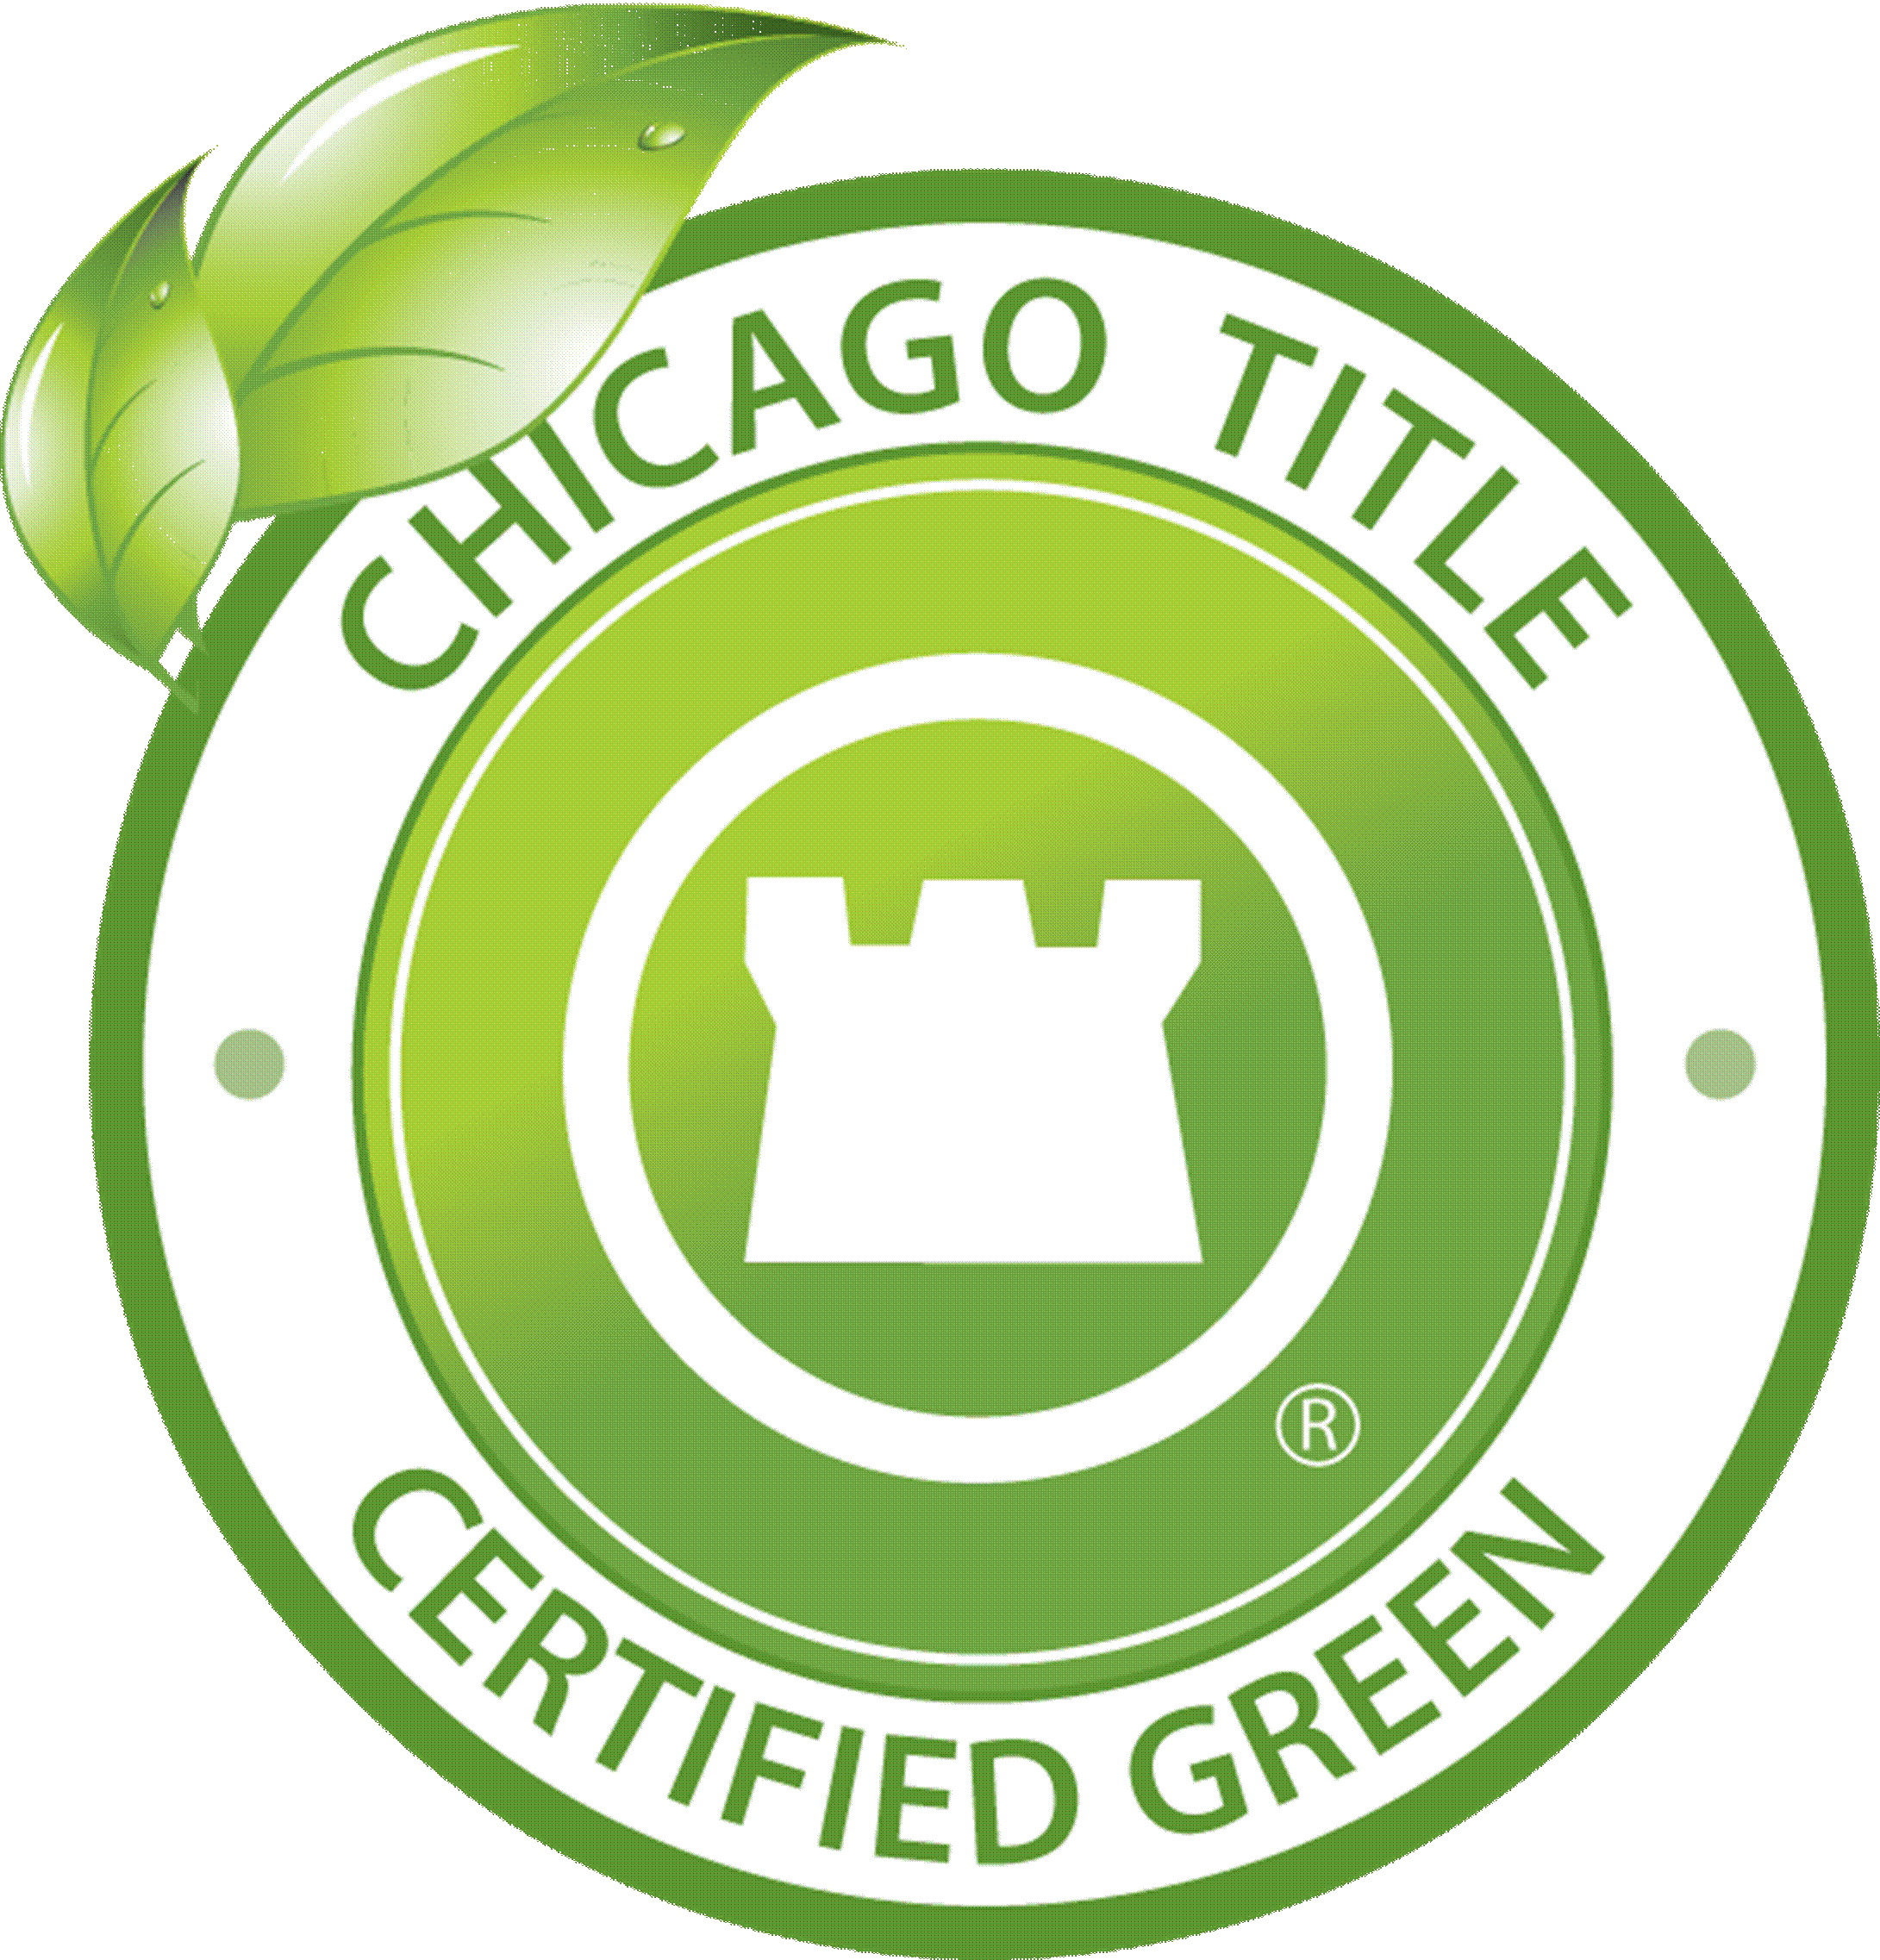 Chicago Title is Certified Green!